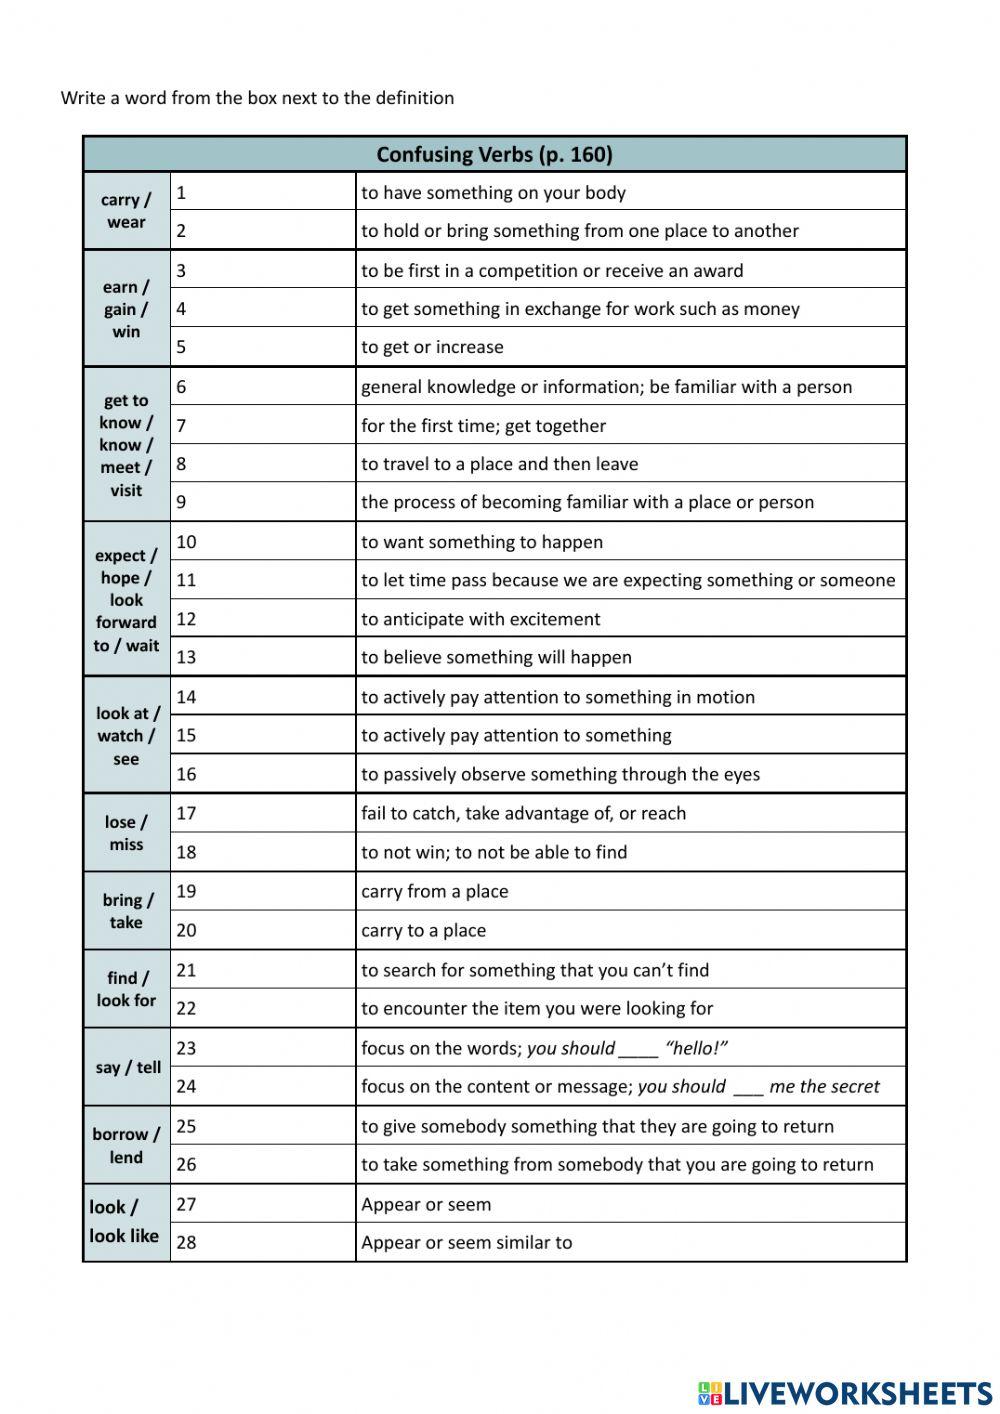 INT2-Confusing Verbs